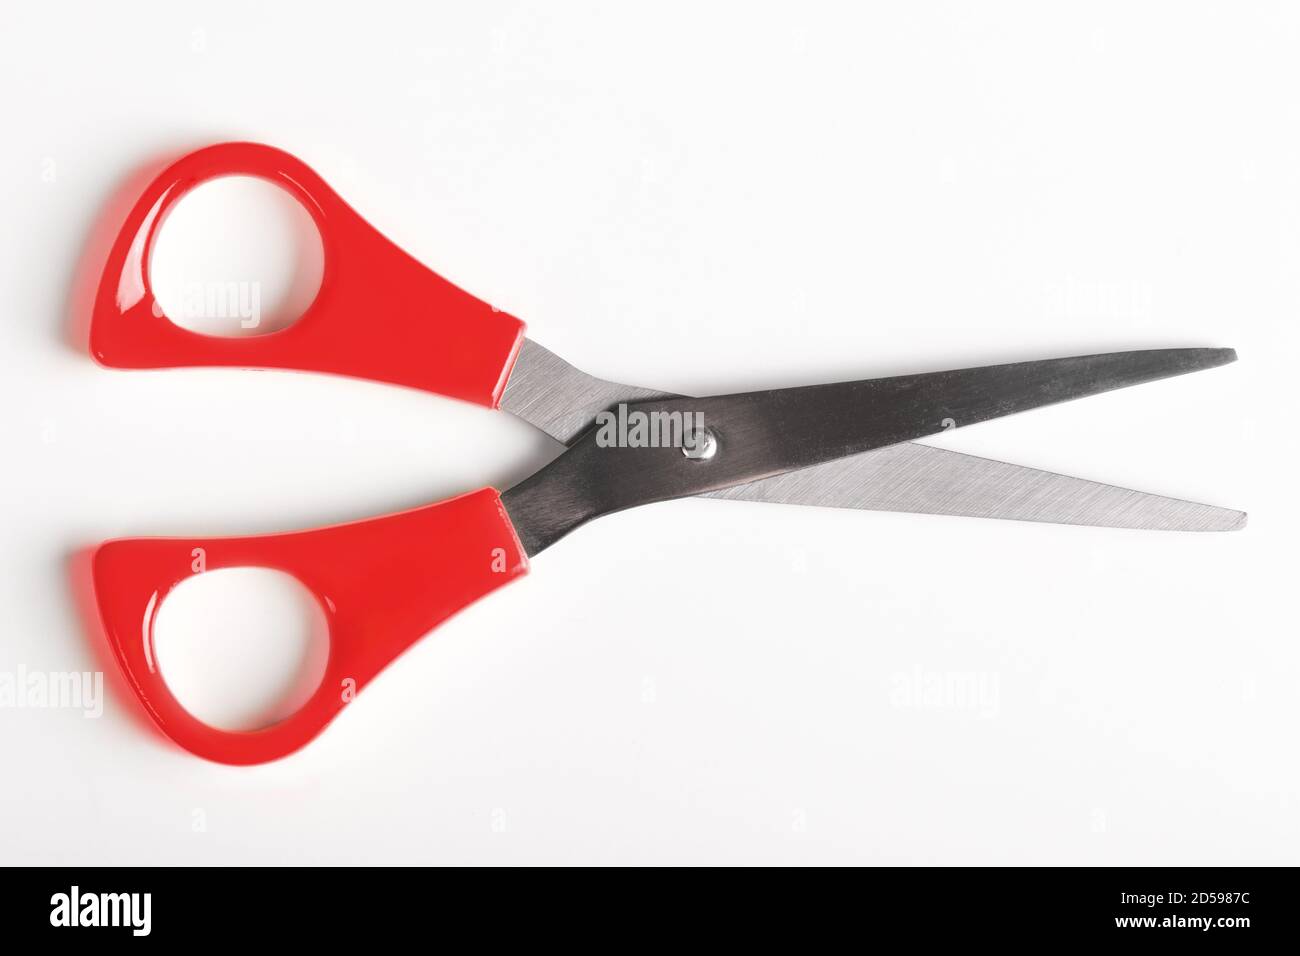 A pair of scissors with bright red handles, open as if about to cut. Stock Photo